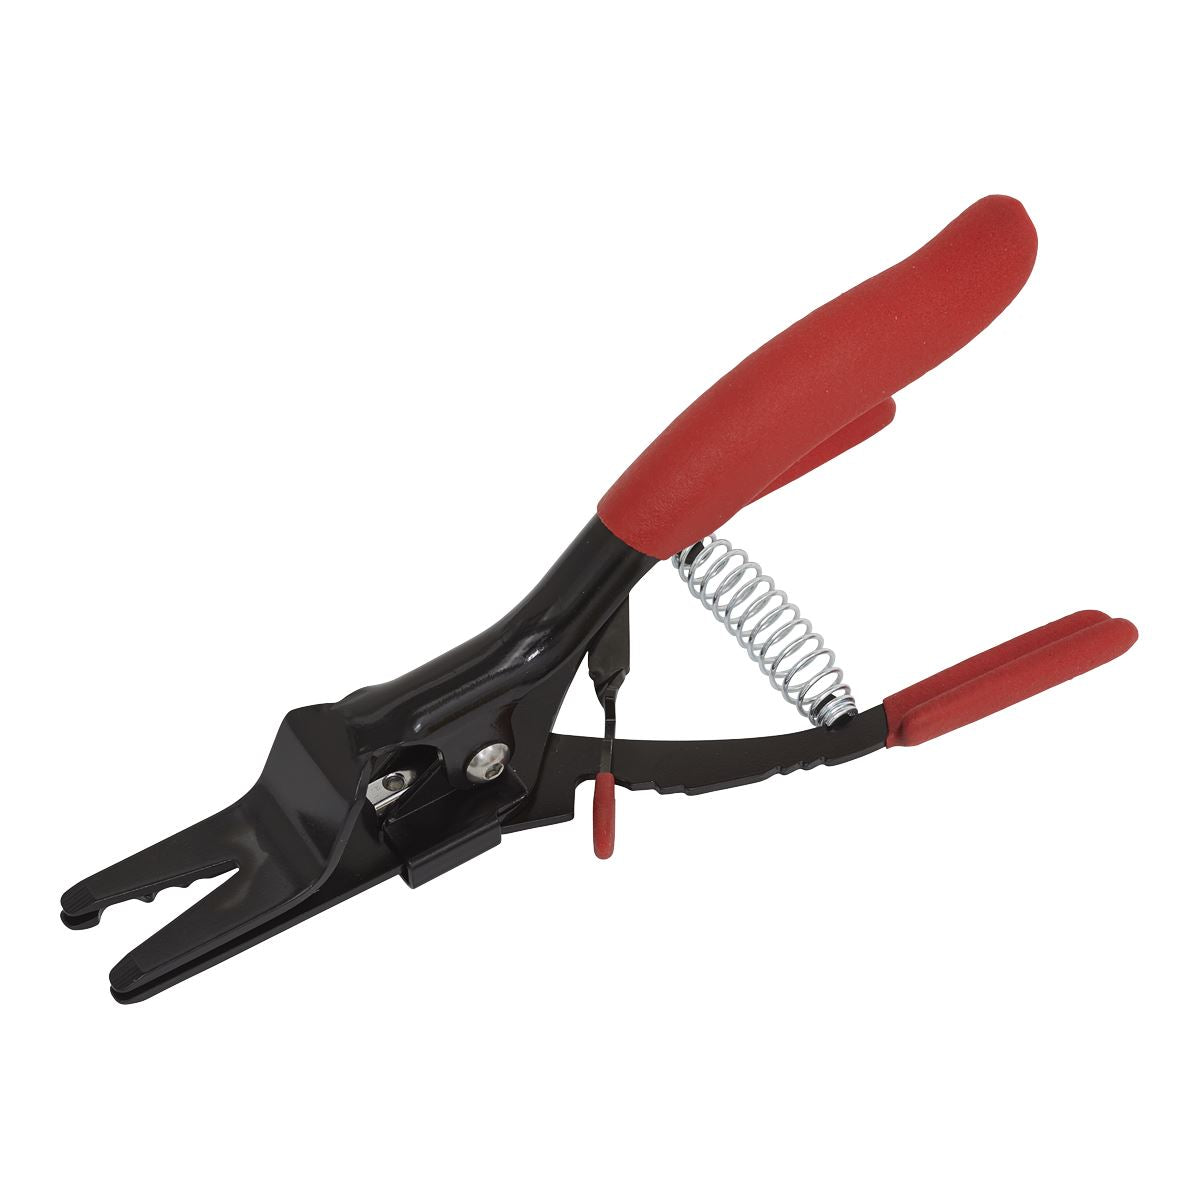 Sealey Hose Removal Pliers